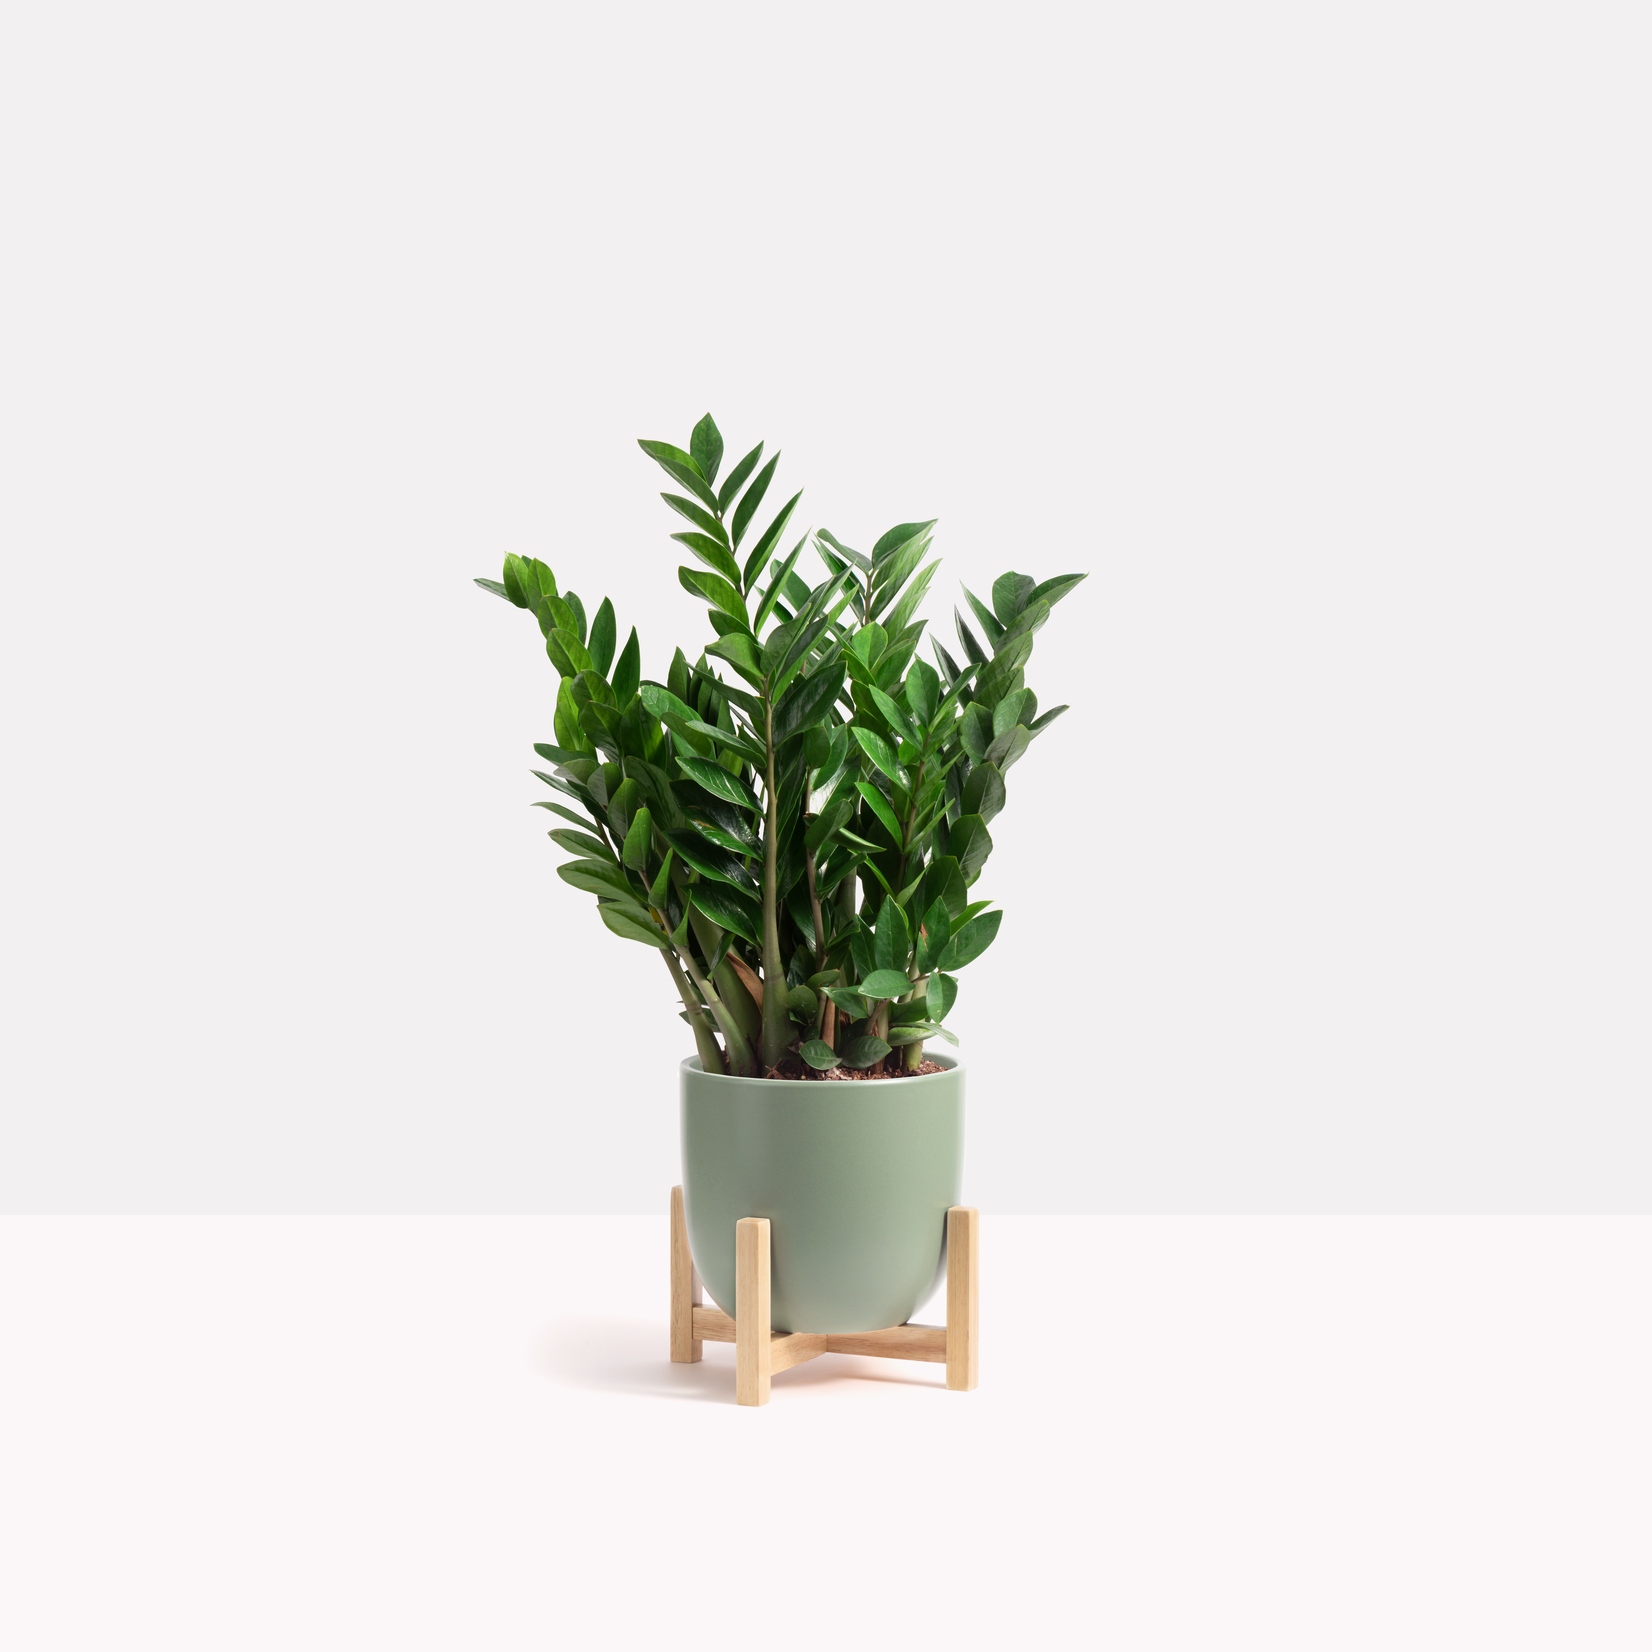 Contour Ceramic Planter + Wood Stand - Forest Green 10"